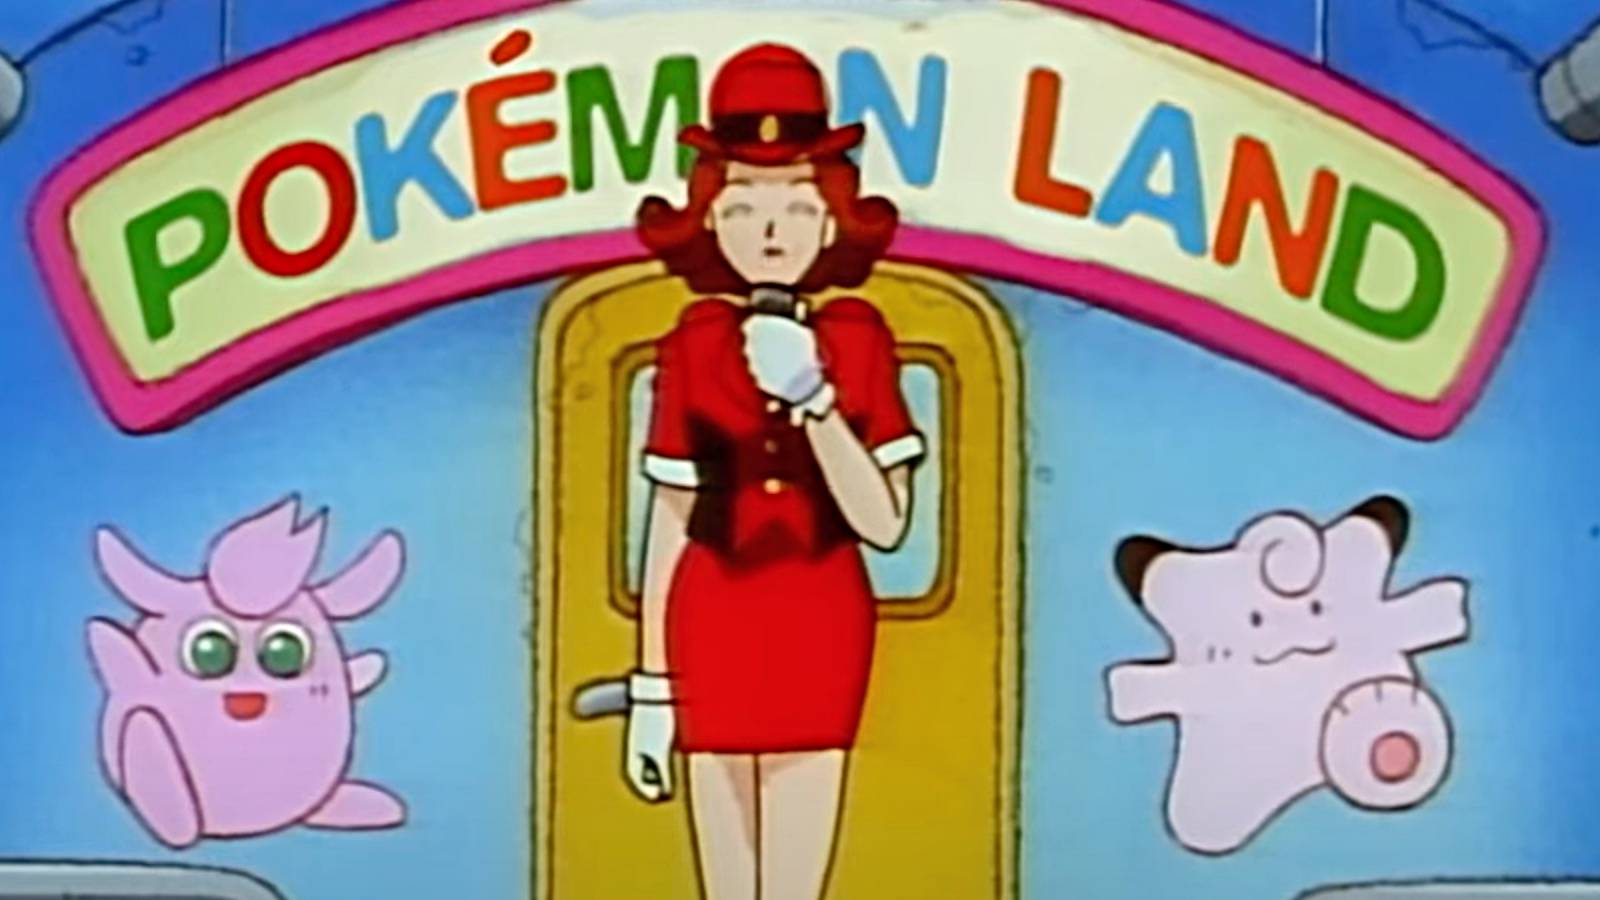 a screenshot from the Pokemon anime shows a women presenting an attraction, in front of a sign saying "Pokemon Land"